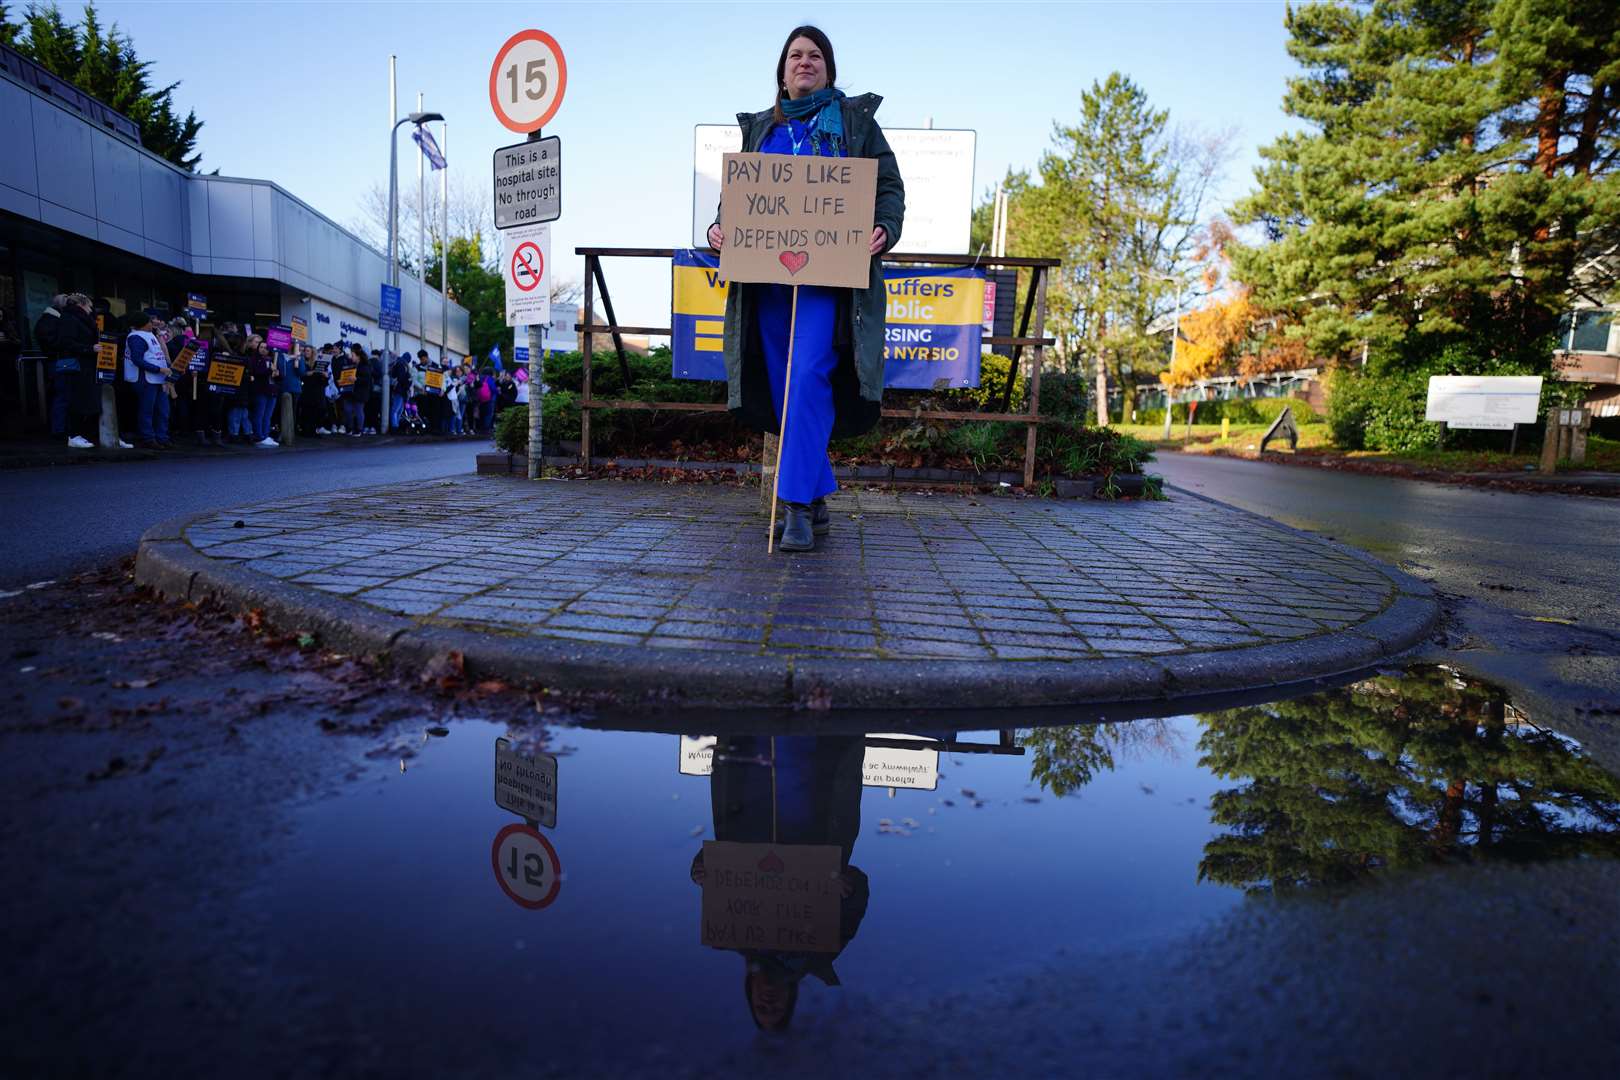 Madelaine Watkins joins members of the Royal College of Nursing on the picket line outside at Cardiff University Hospital earlier this week (PA)